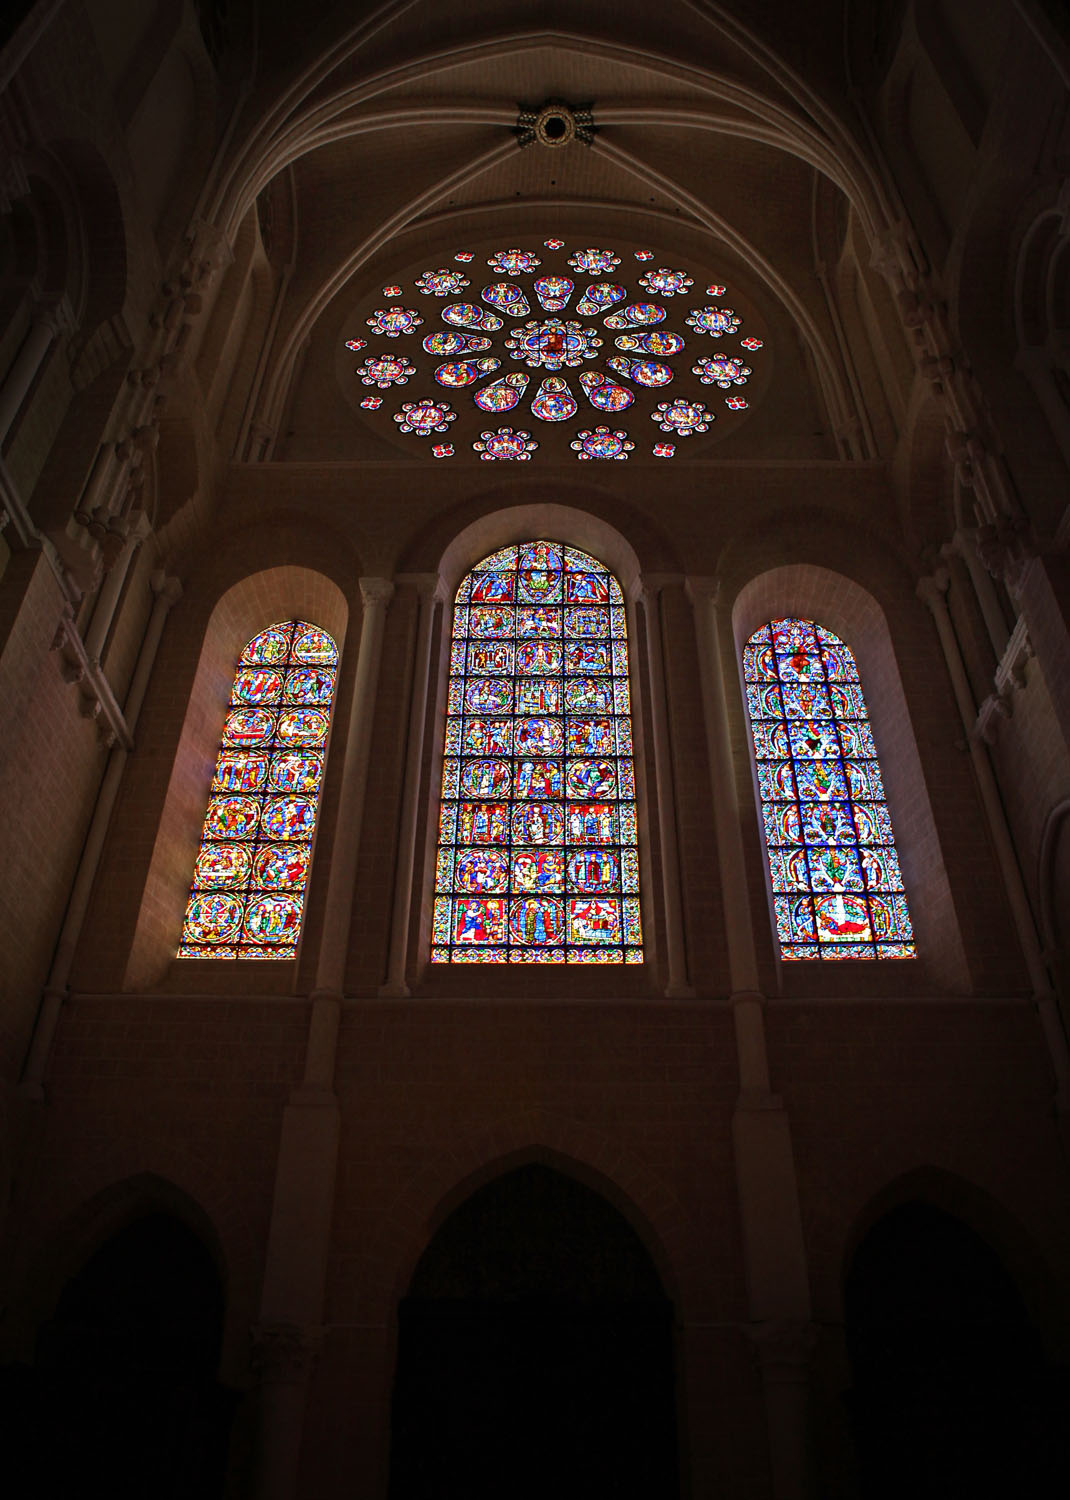 West Rose Window, Chartres Cathedral, Chartres, France